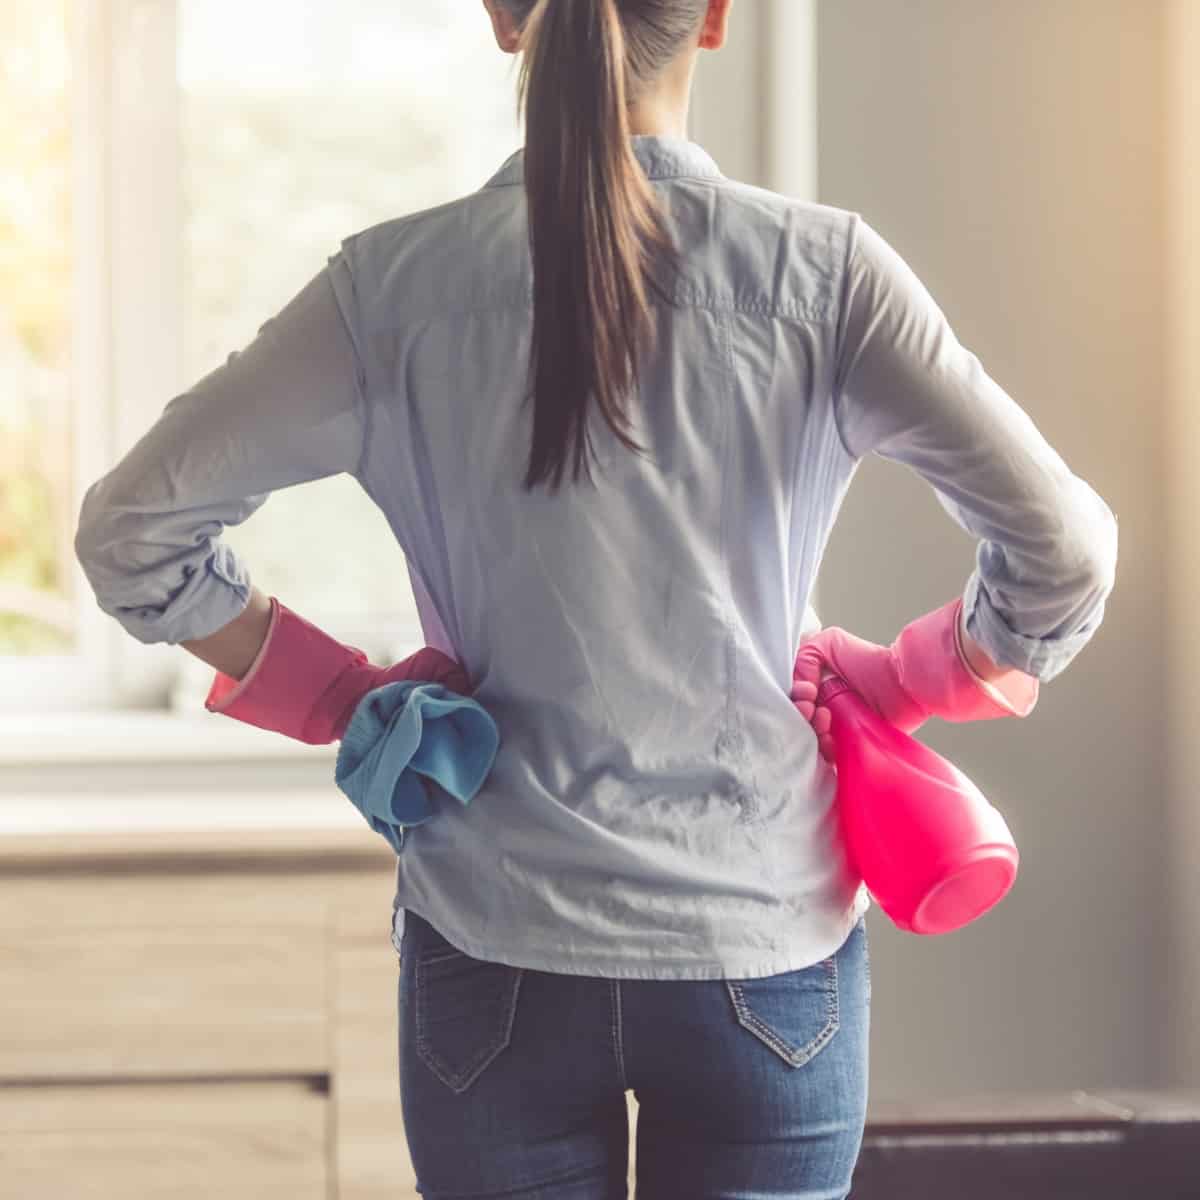 Keeping a clean home is easier than you think. MightyMoms.club